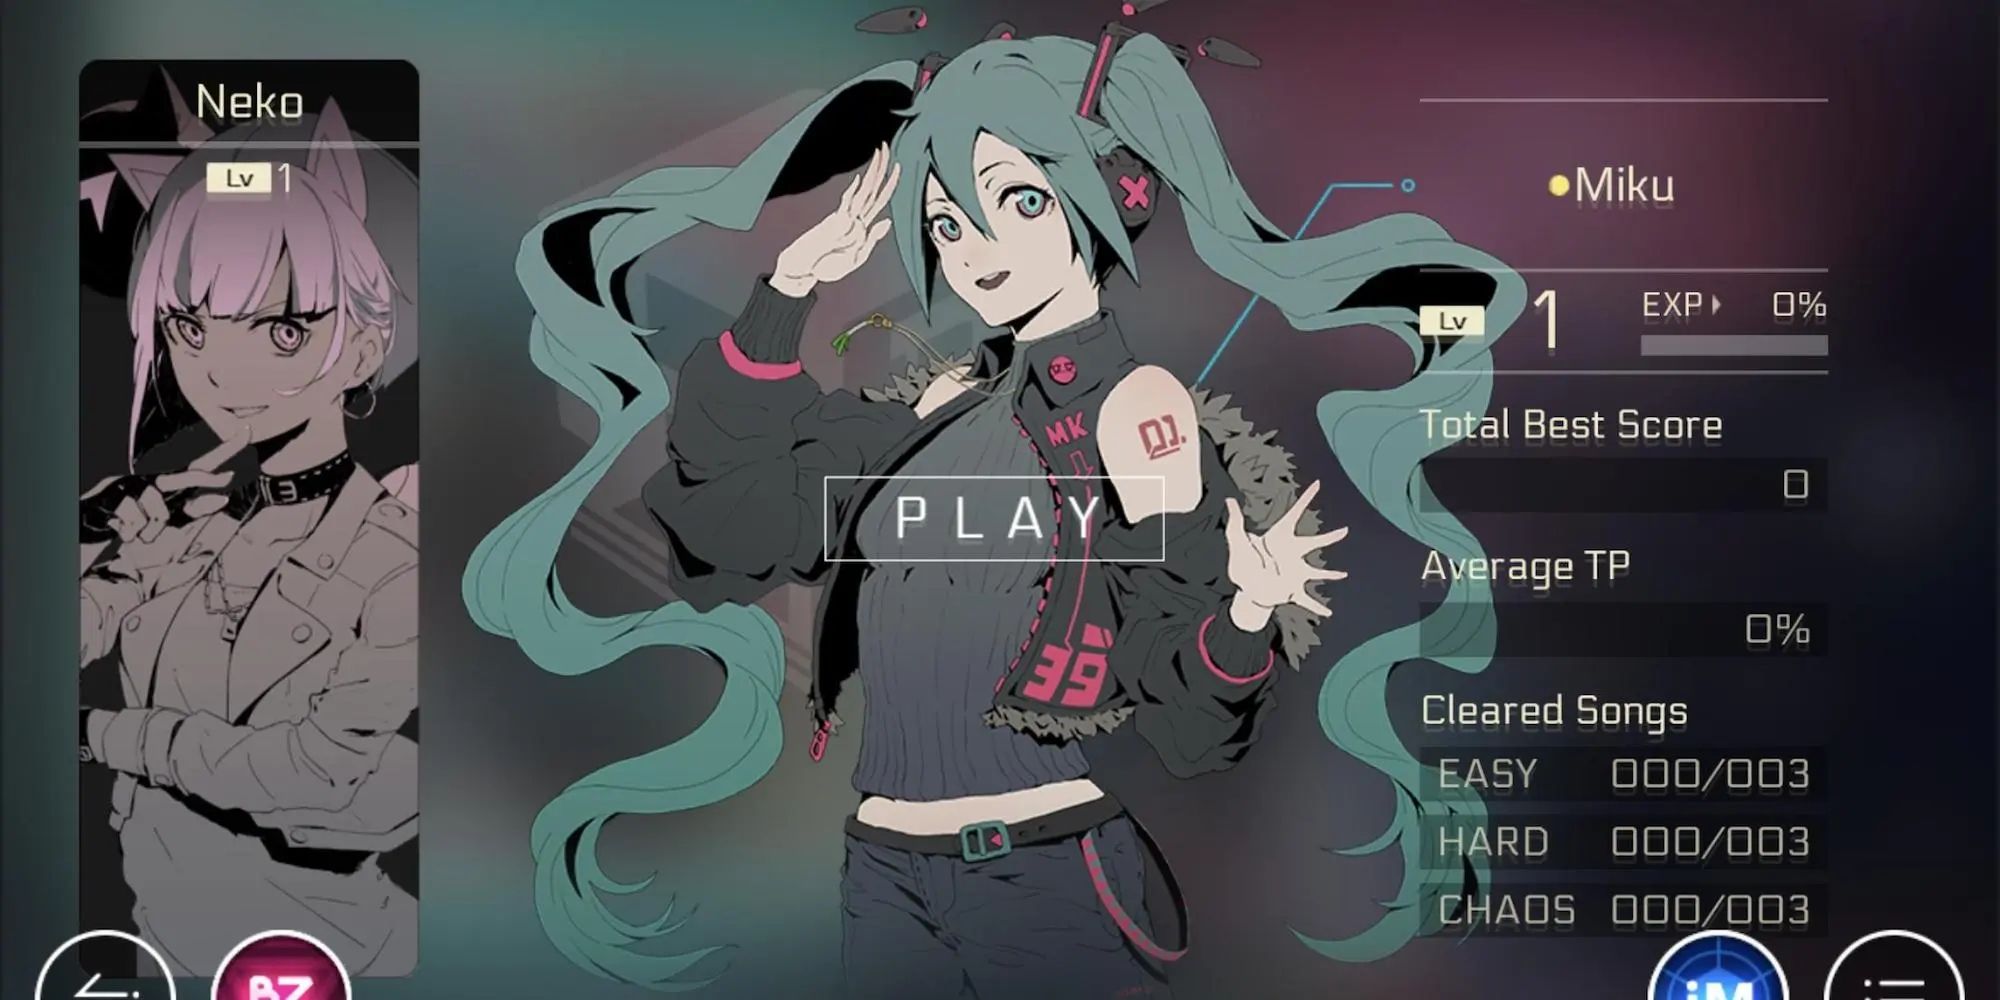 Hatsune Miku saluting and smiling at the camera in Cytus 2 on the song selection list